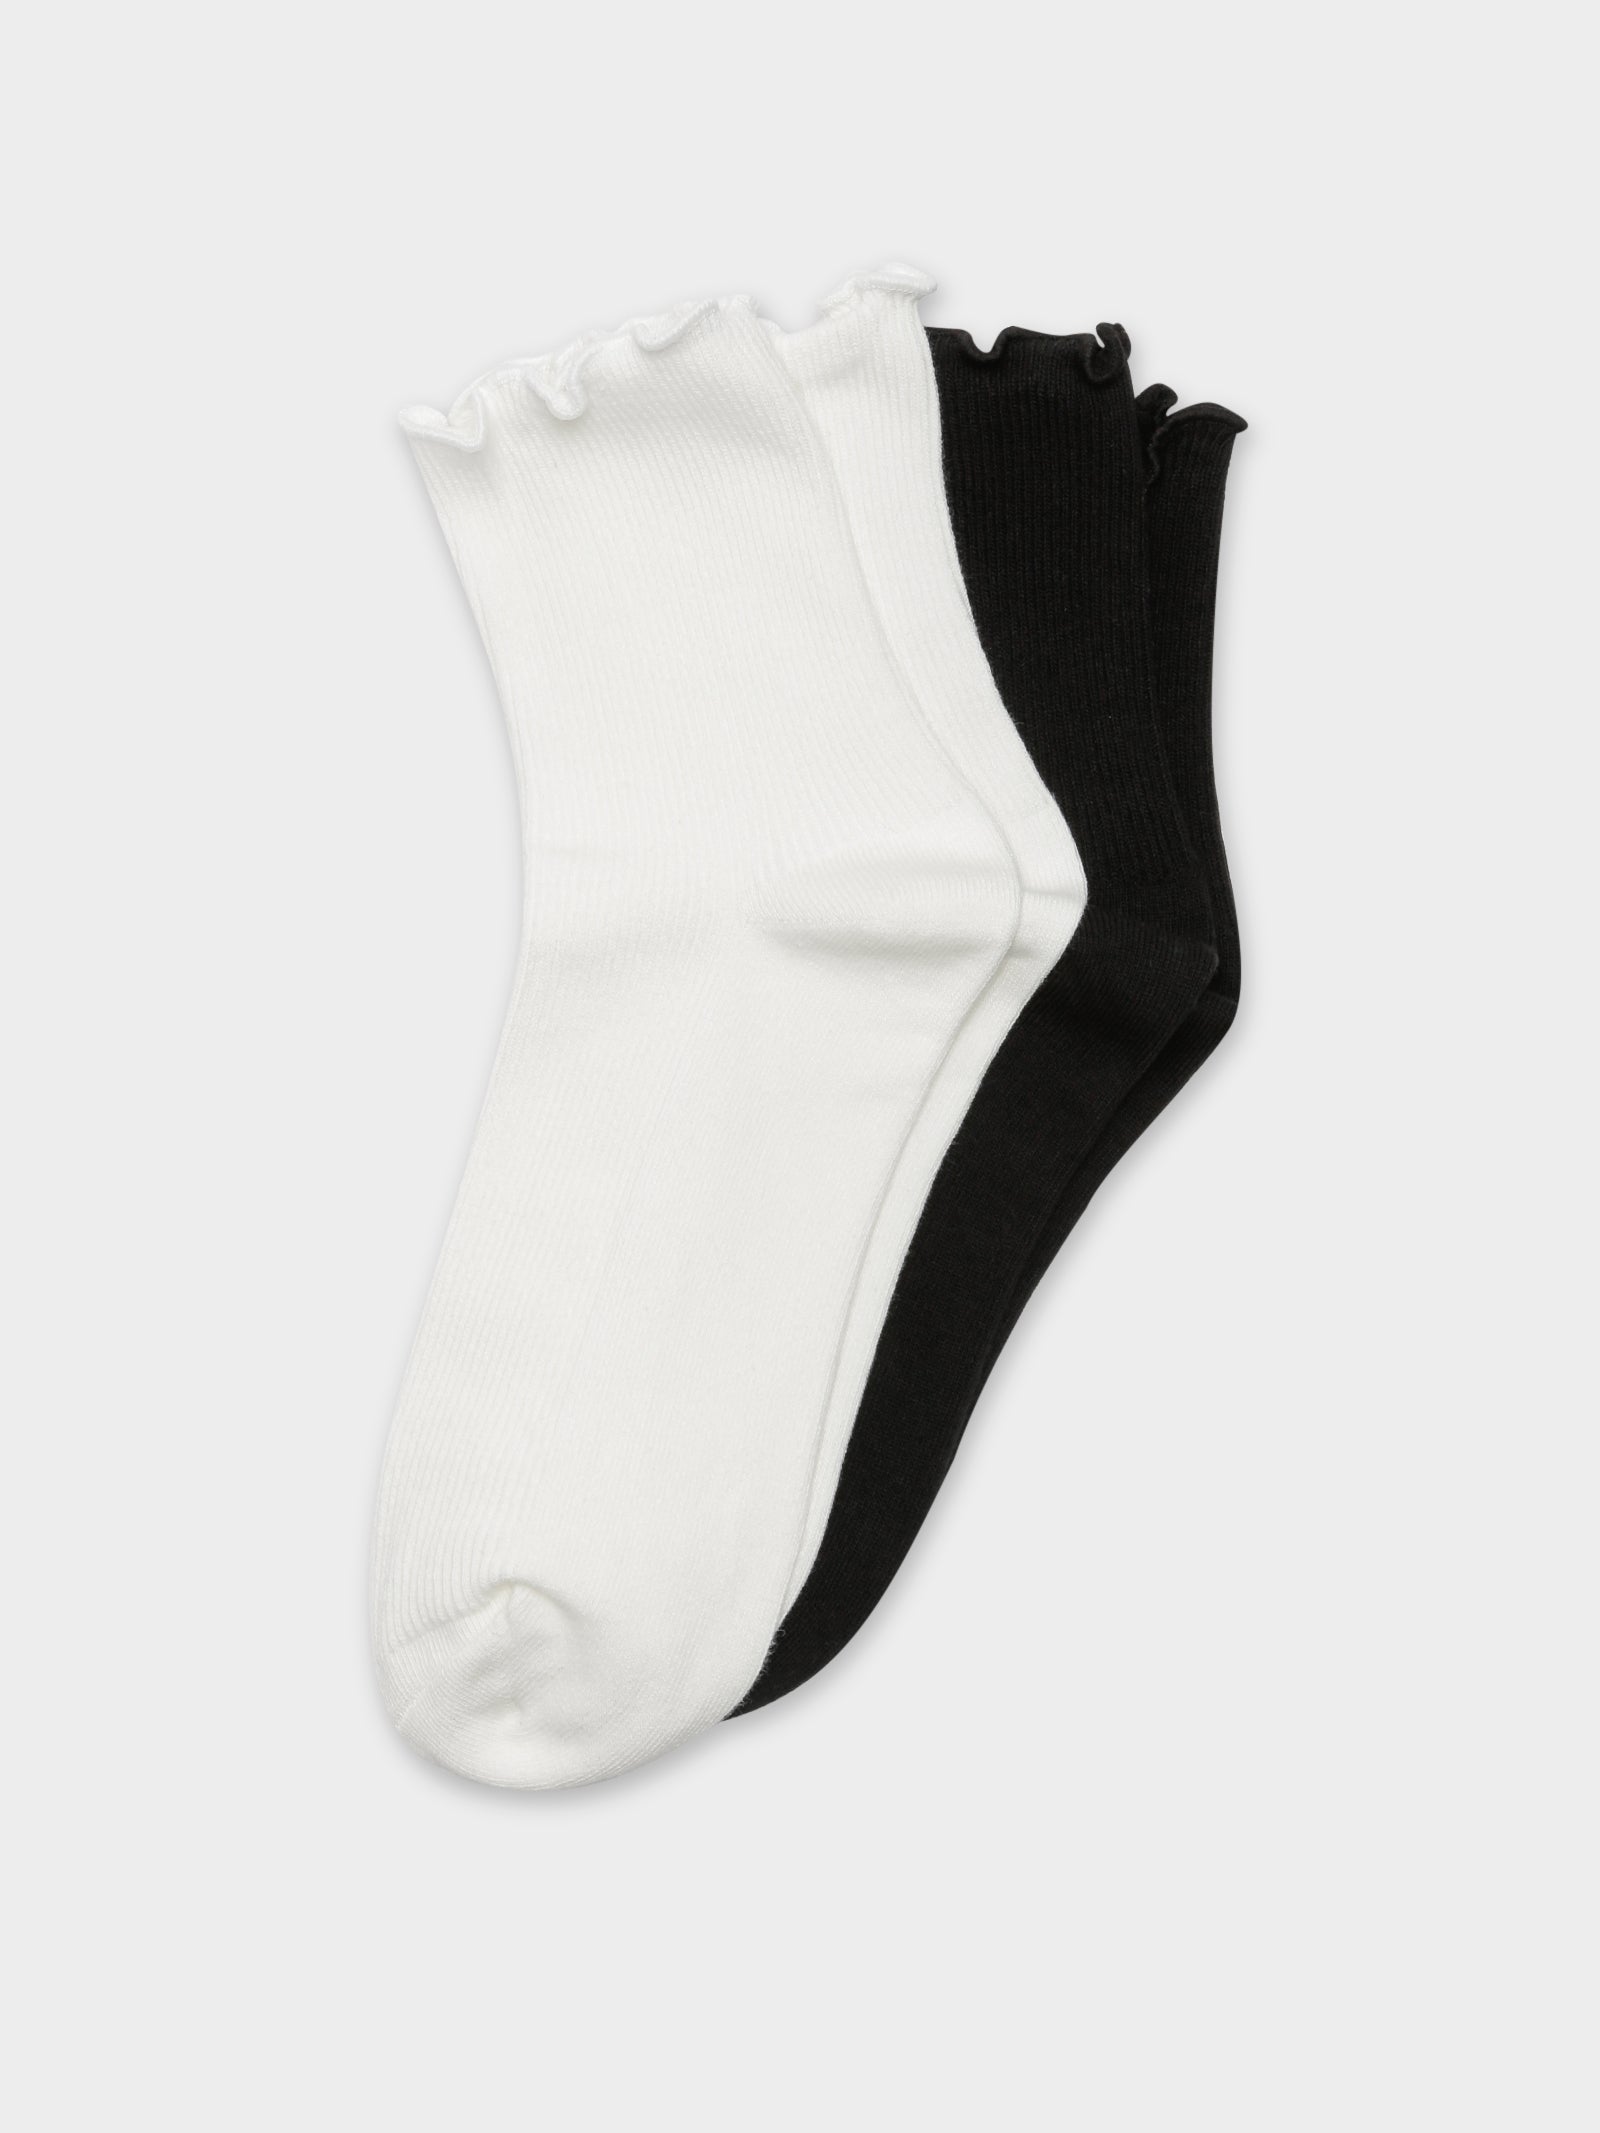 2 Pairs of Ruffle Ankle Socks in Black & White